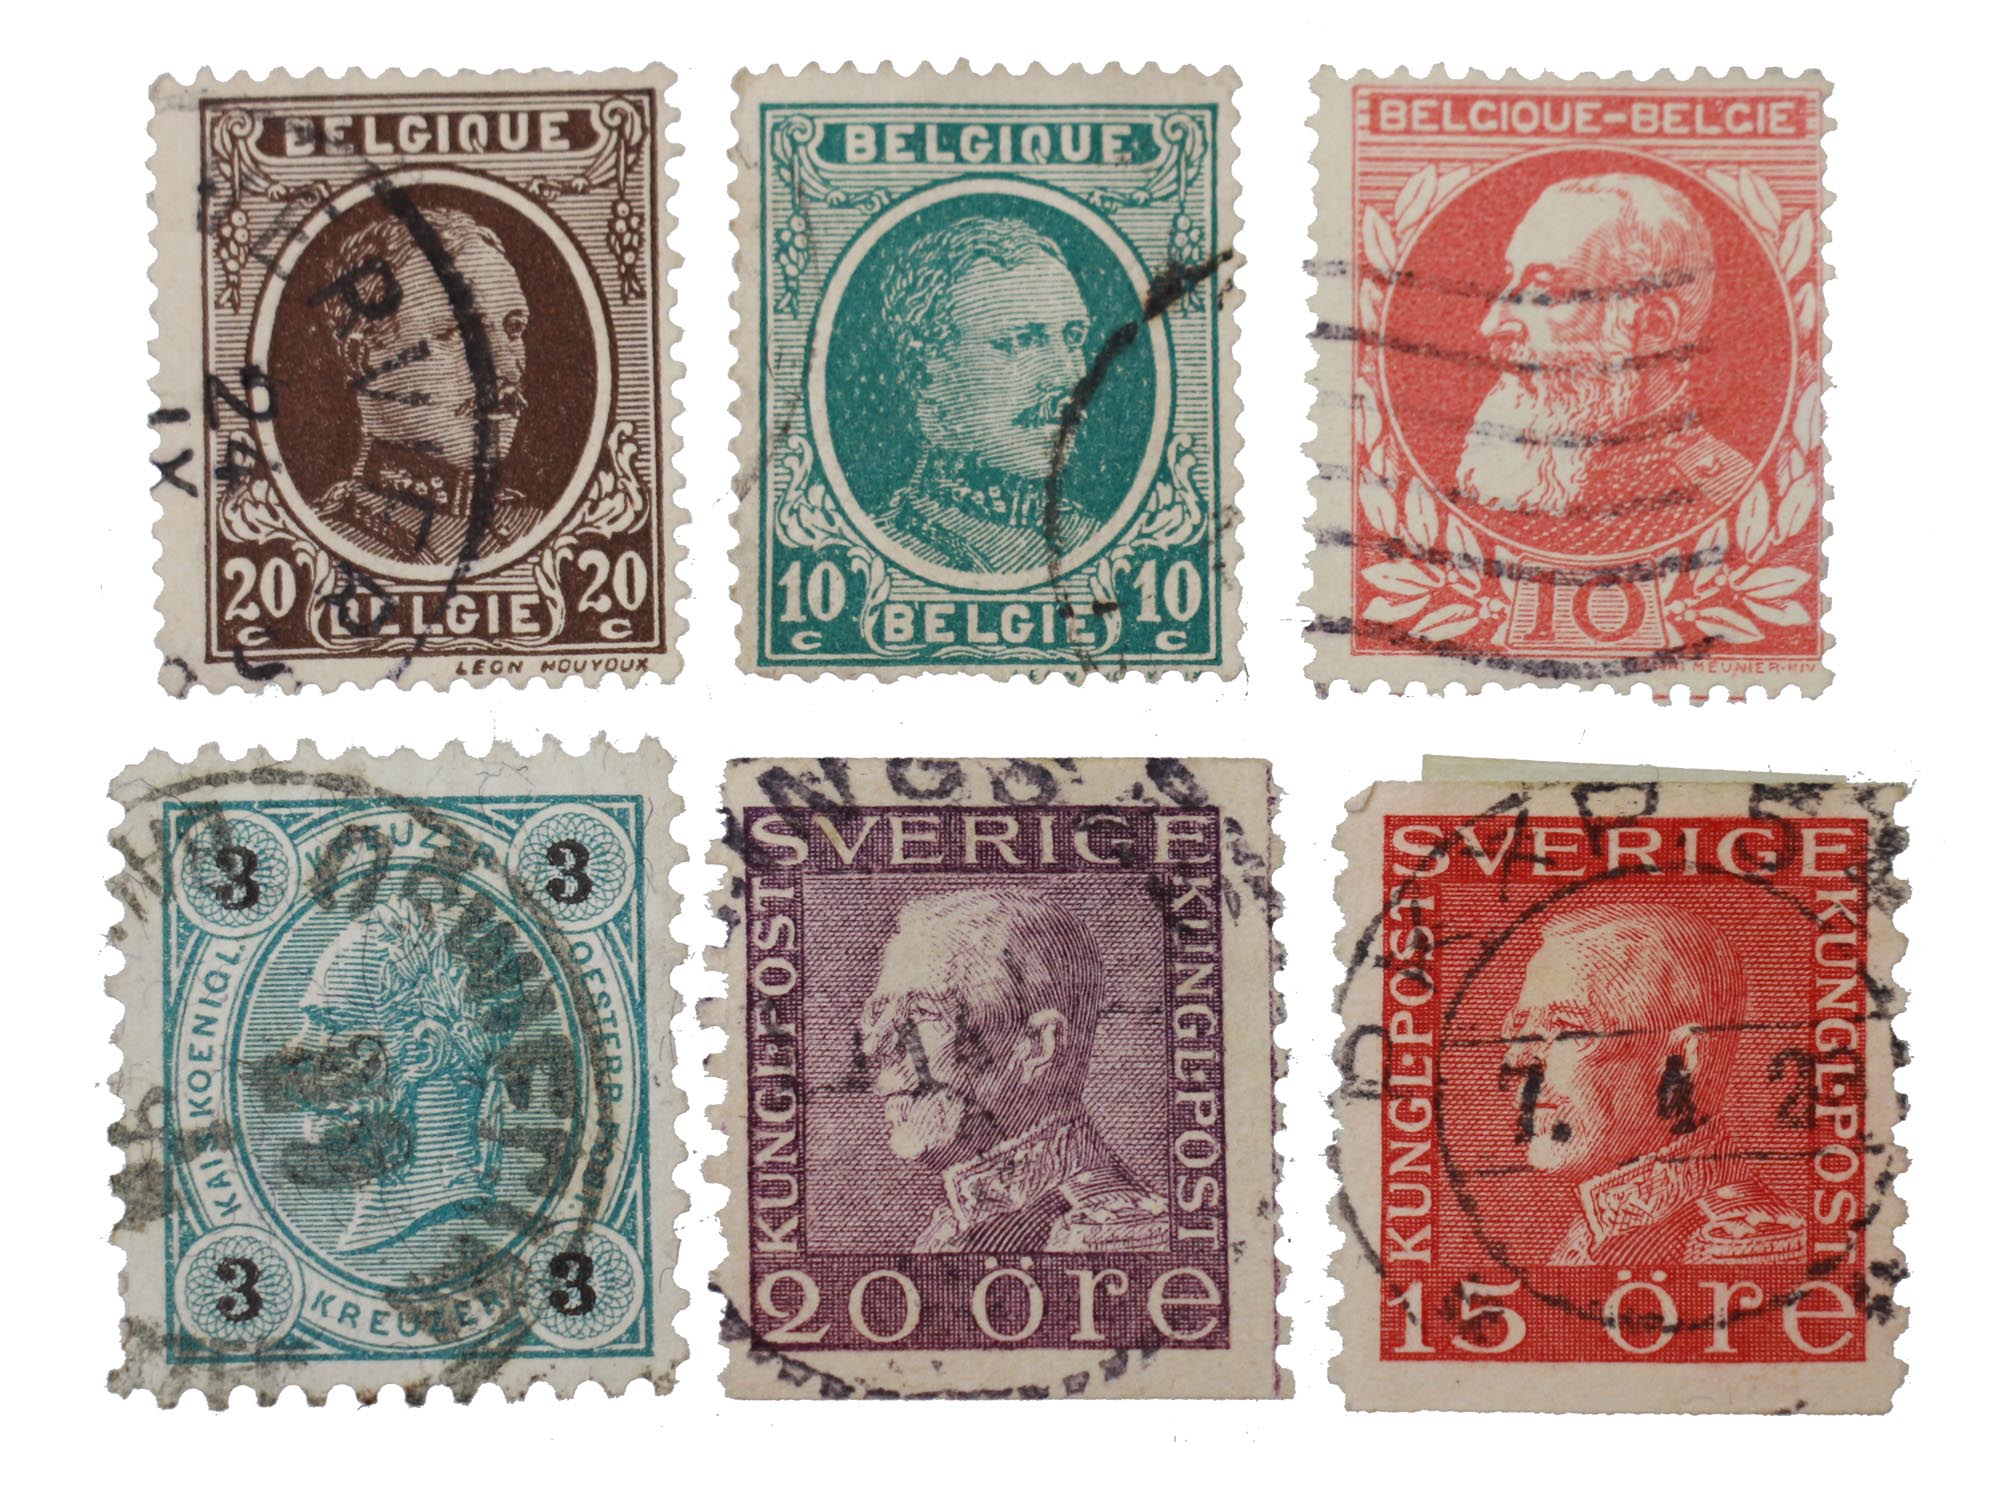 VINTAGE STAMPS FROM EUROPEAN COUNTRIES PIC-5